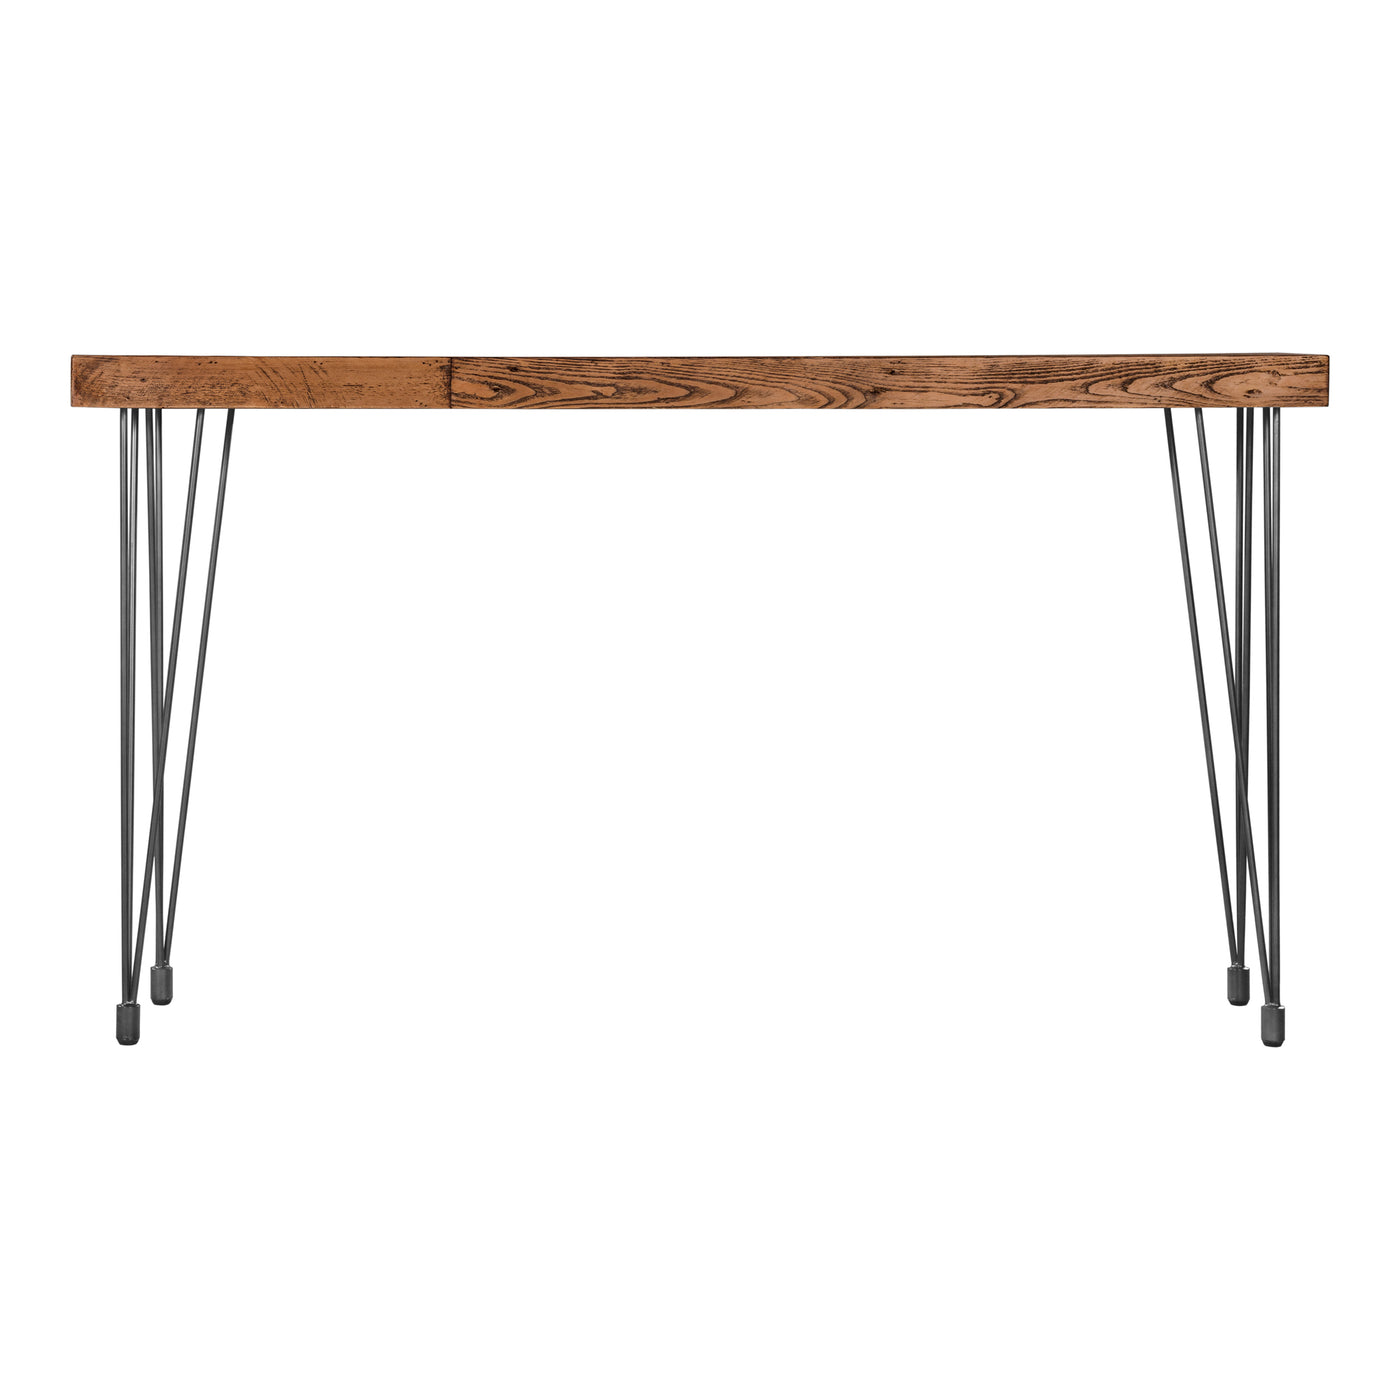 The Boneta Collection features thick, chunky planks of solid recycled pine and sturdy iron legs. Each piece has been caref...